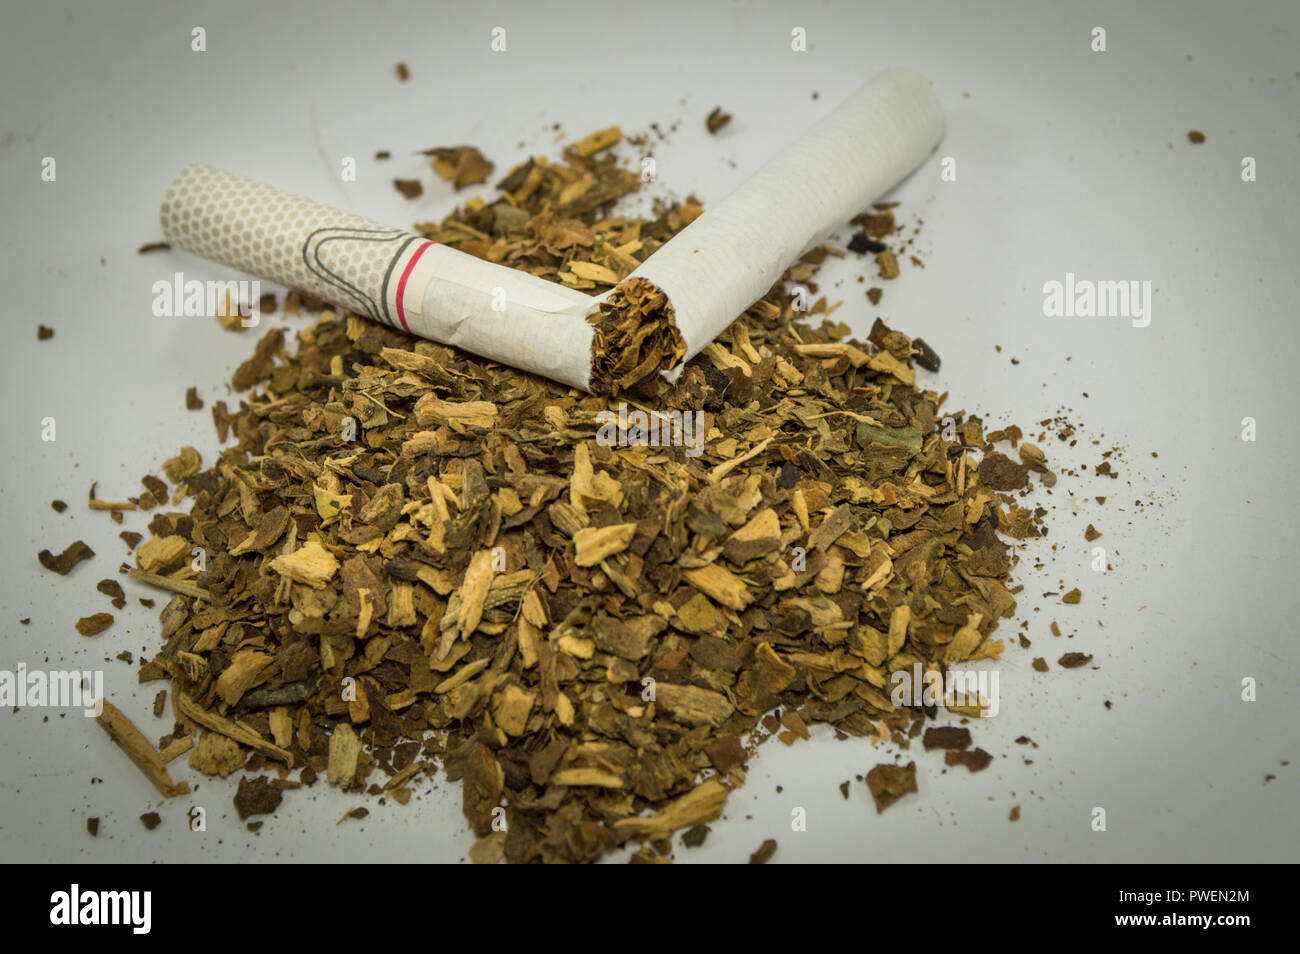 Cigarette on loose shredded tobacco, close up. Stock Photo